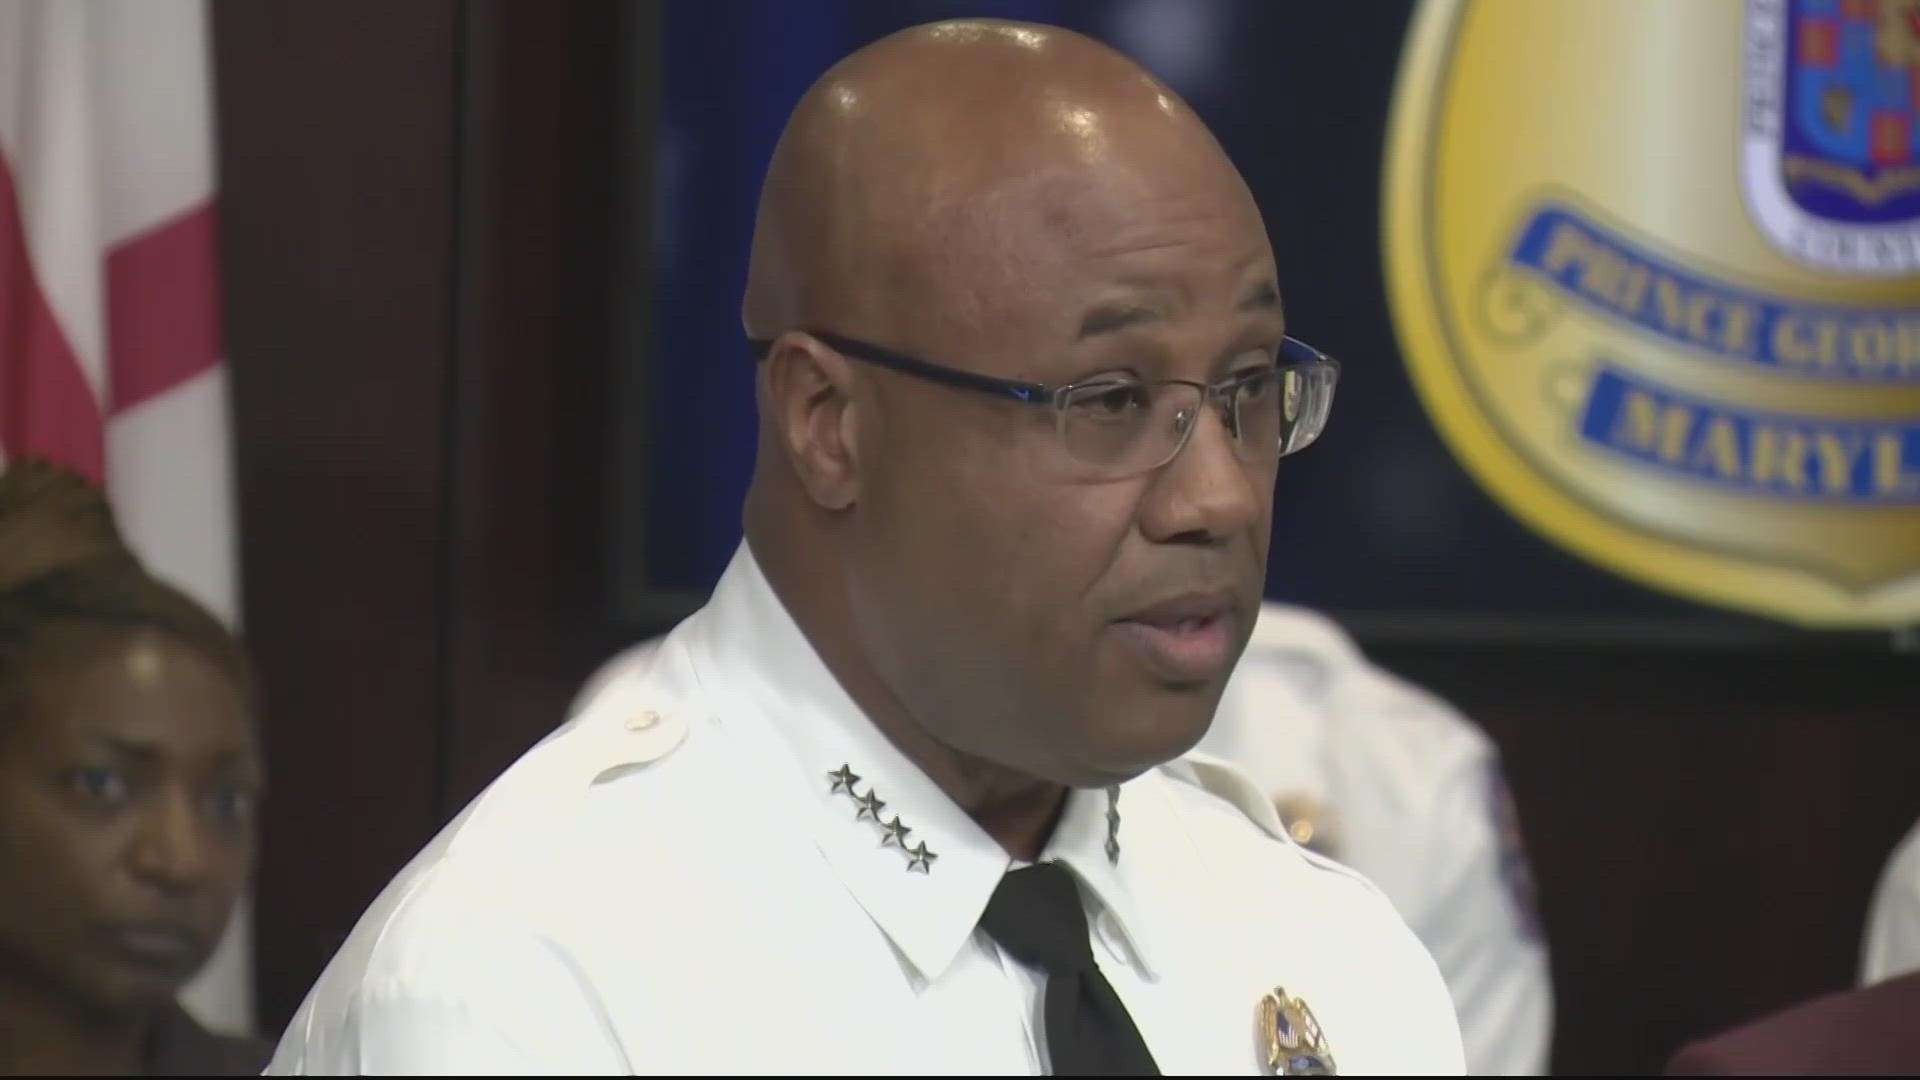 Two leaders in Prince George's County are calling for a review of any “special enforcement” units operated by the police department there.